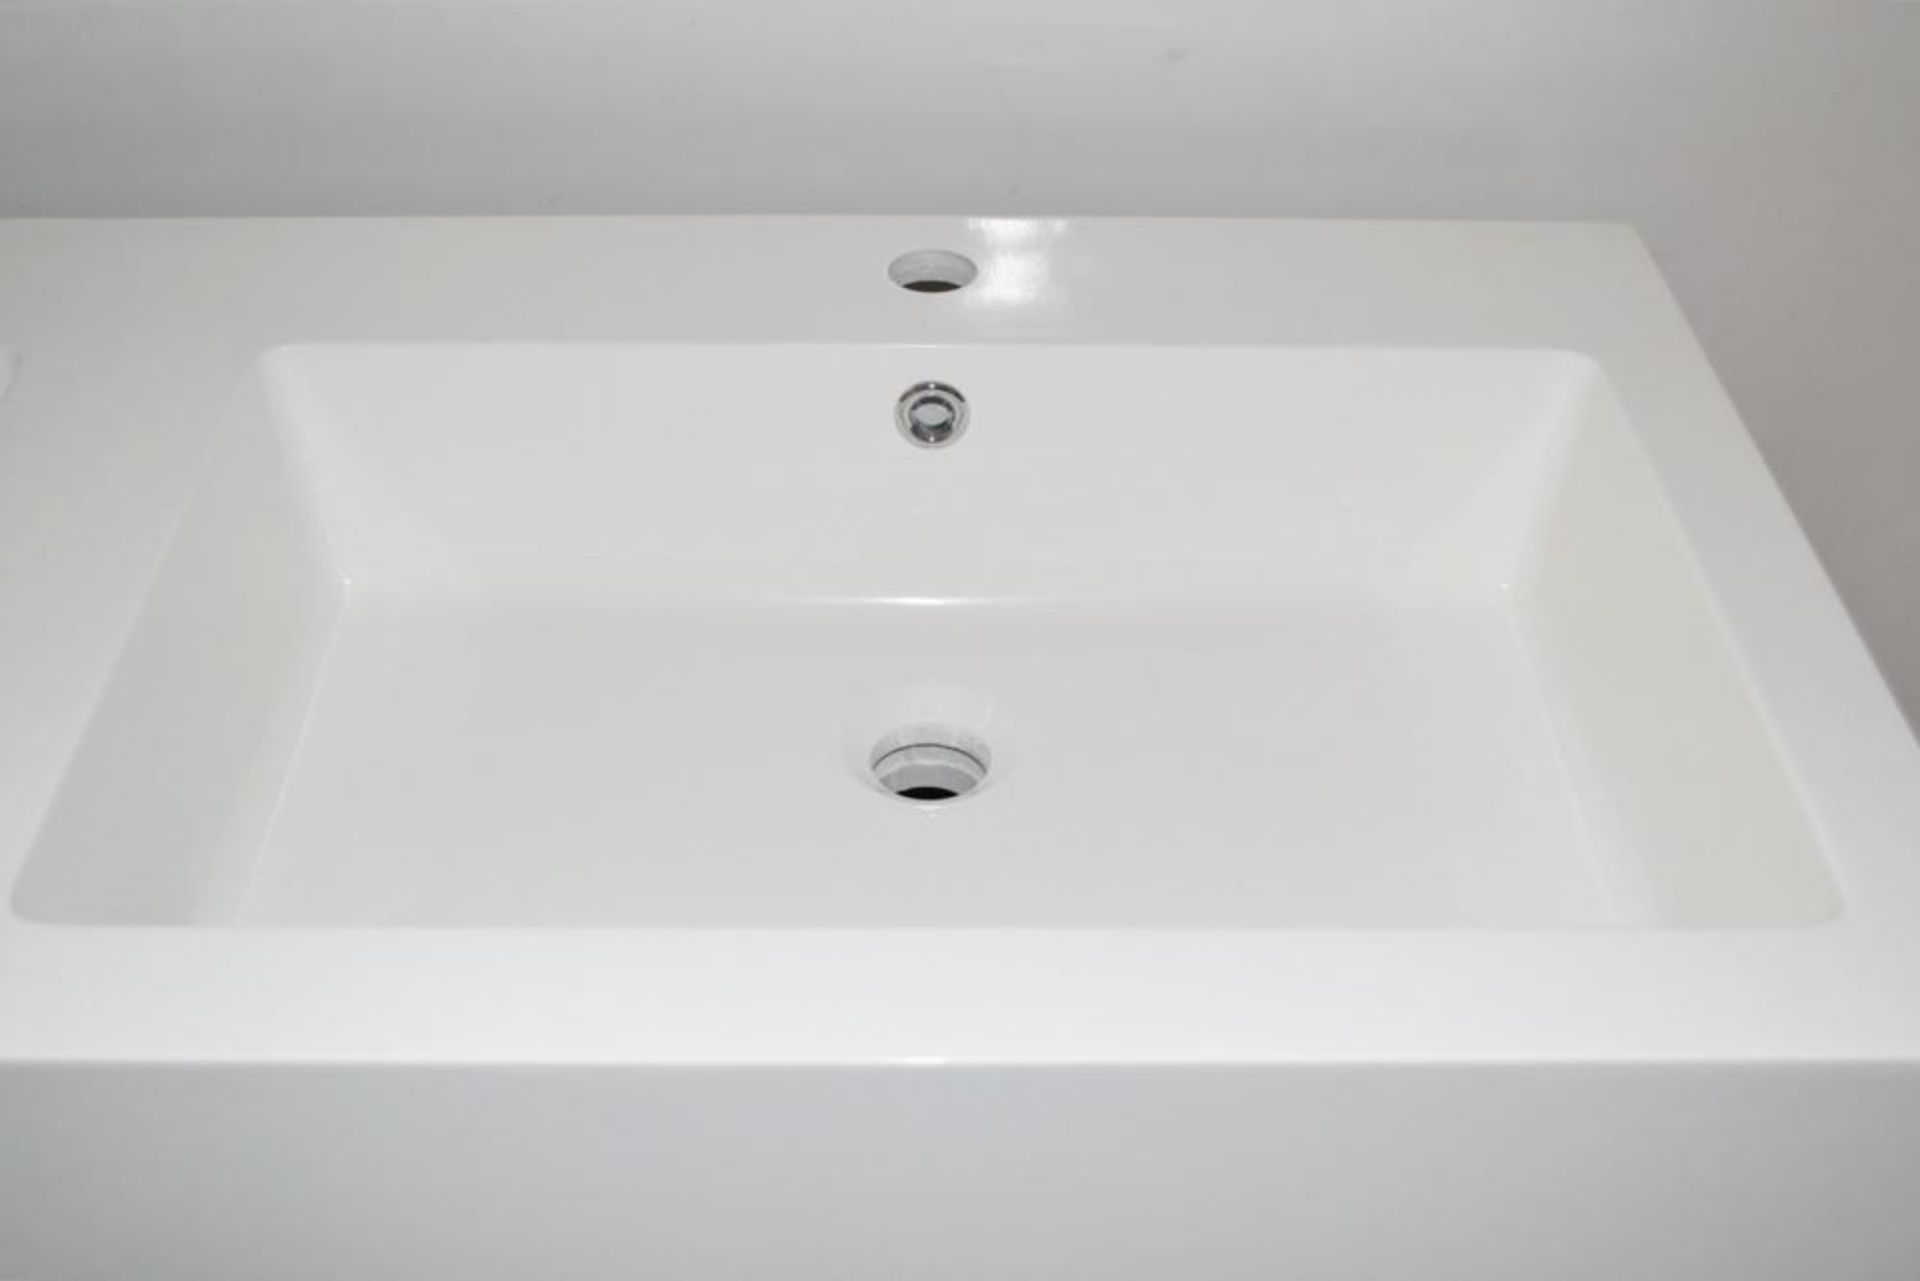 1 x His & Hers Double Bathroom Vanity Unit - 1200mm Wide - Features a High Gloss White Finish and - Image 2 of 7